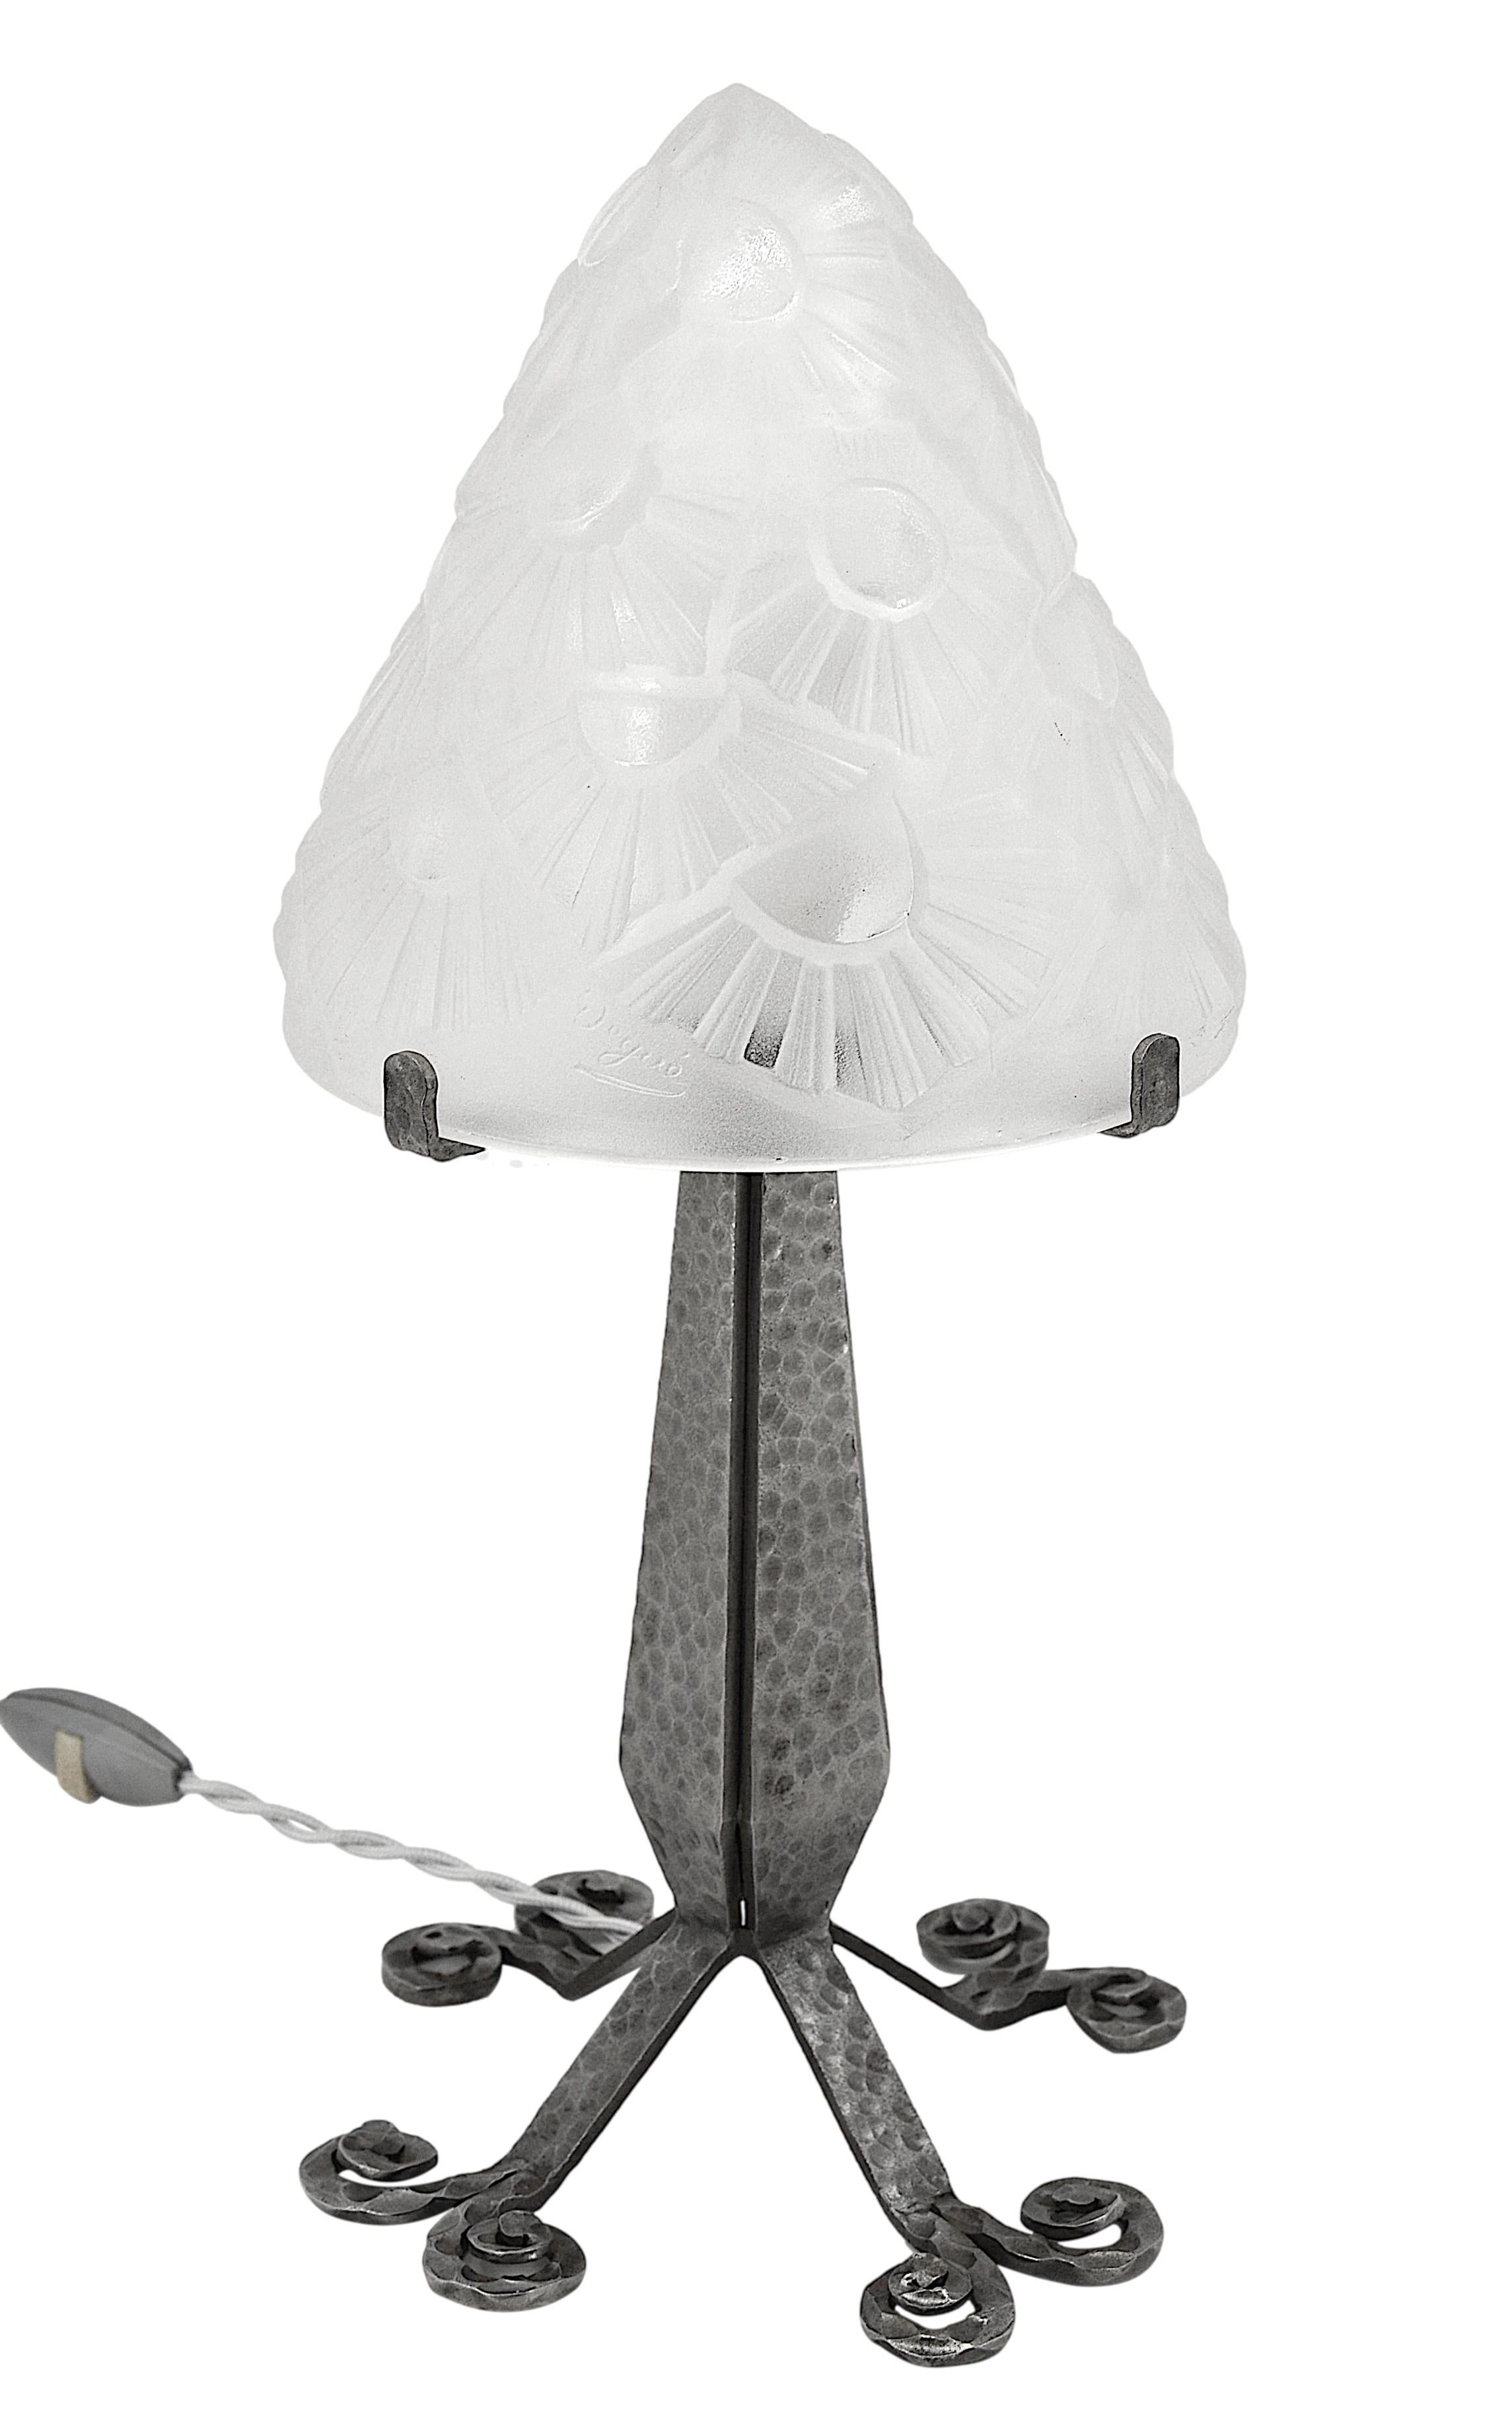 Glass DEGUE & Henri FOURNET 'Le Fer Forgé' French Art Deco Table Lamp, Late 1920s For Sale